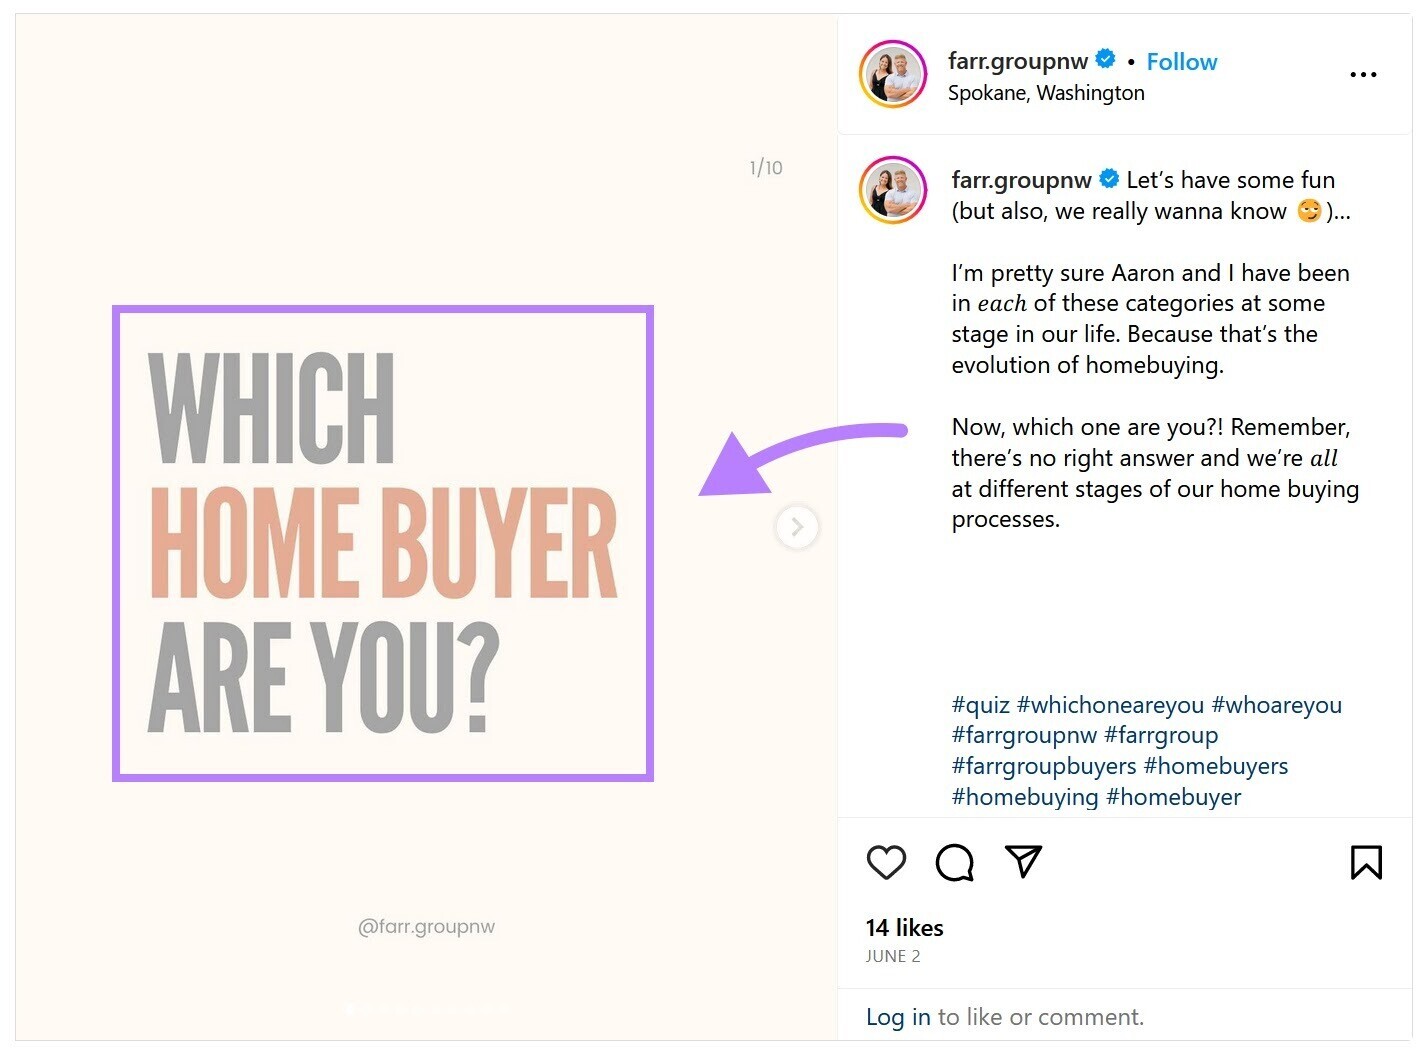 The “which home buyer are you?” quiz on Instagram